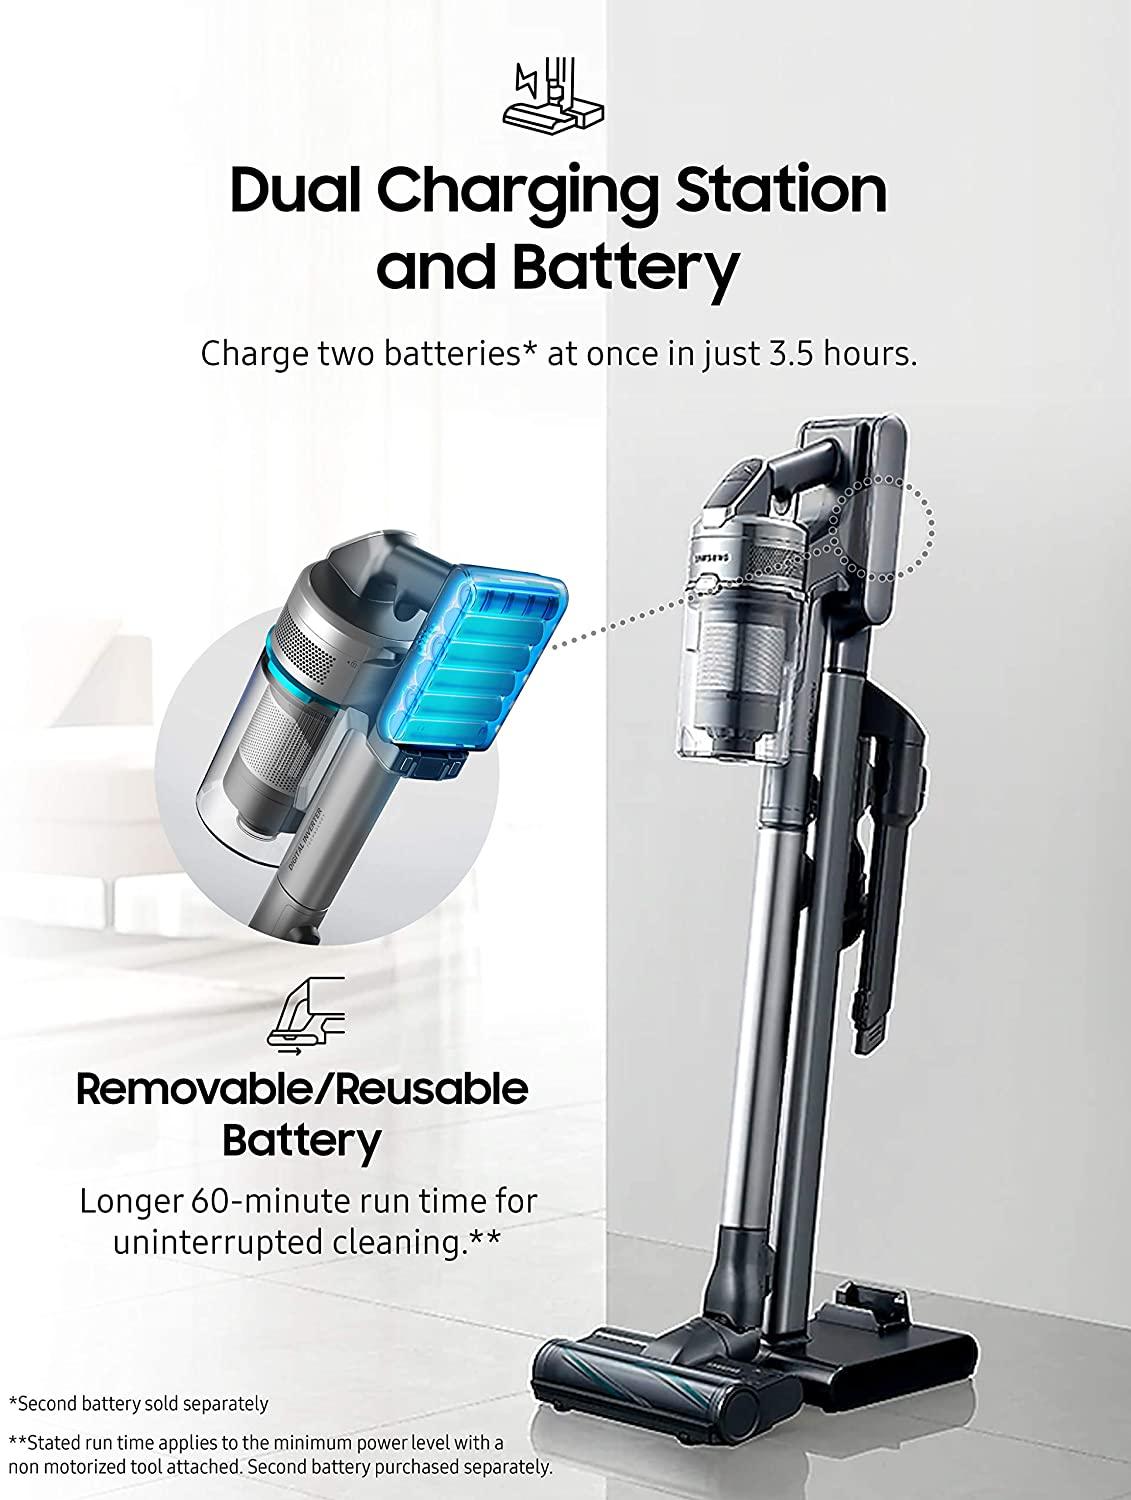 Five Reasons Why You’ll Want to Own The Samsung Jet™ Cordless Stick Vacuum Cleaner